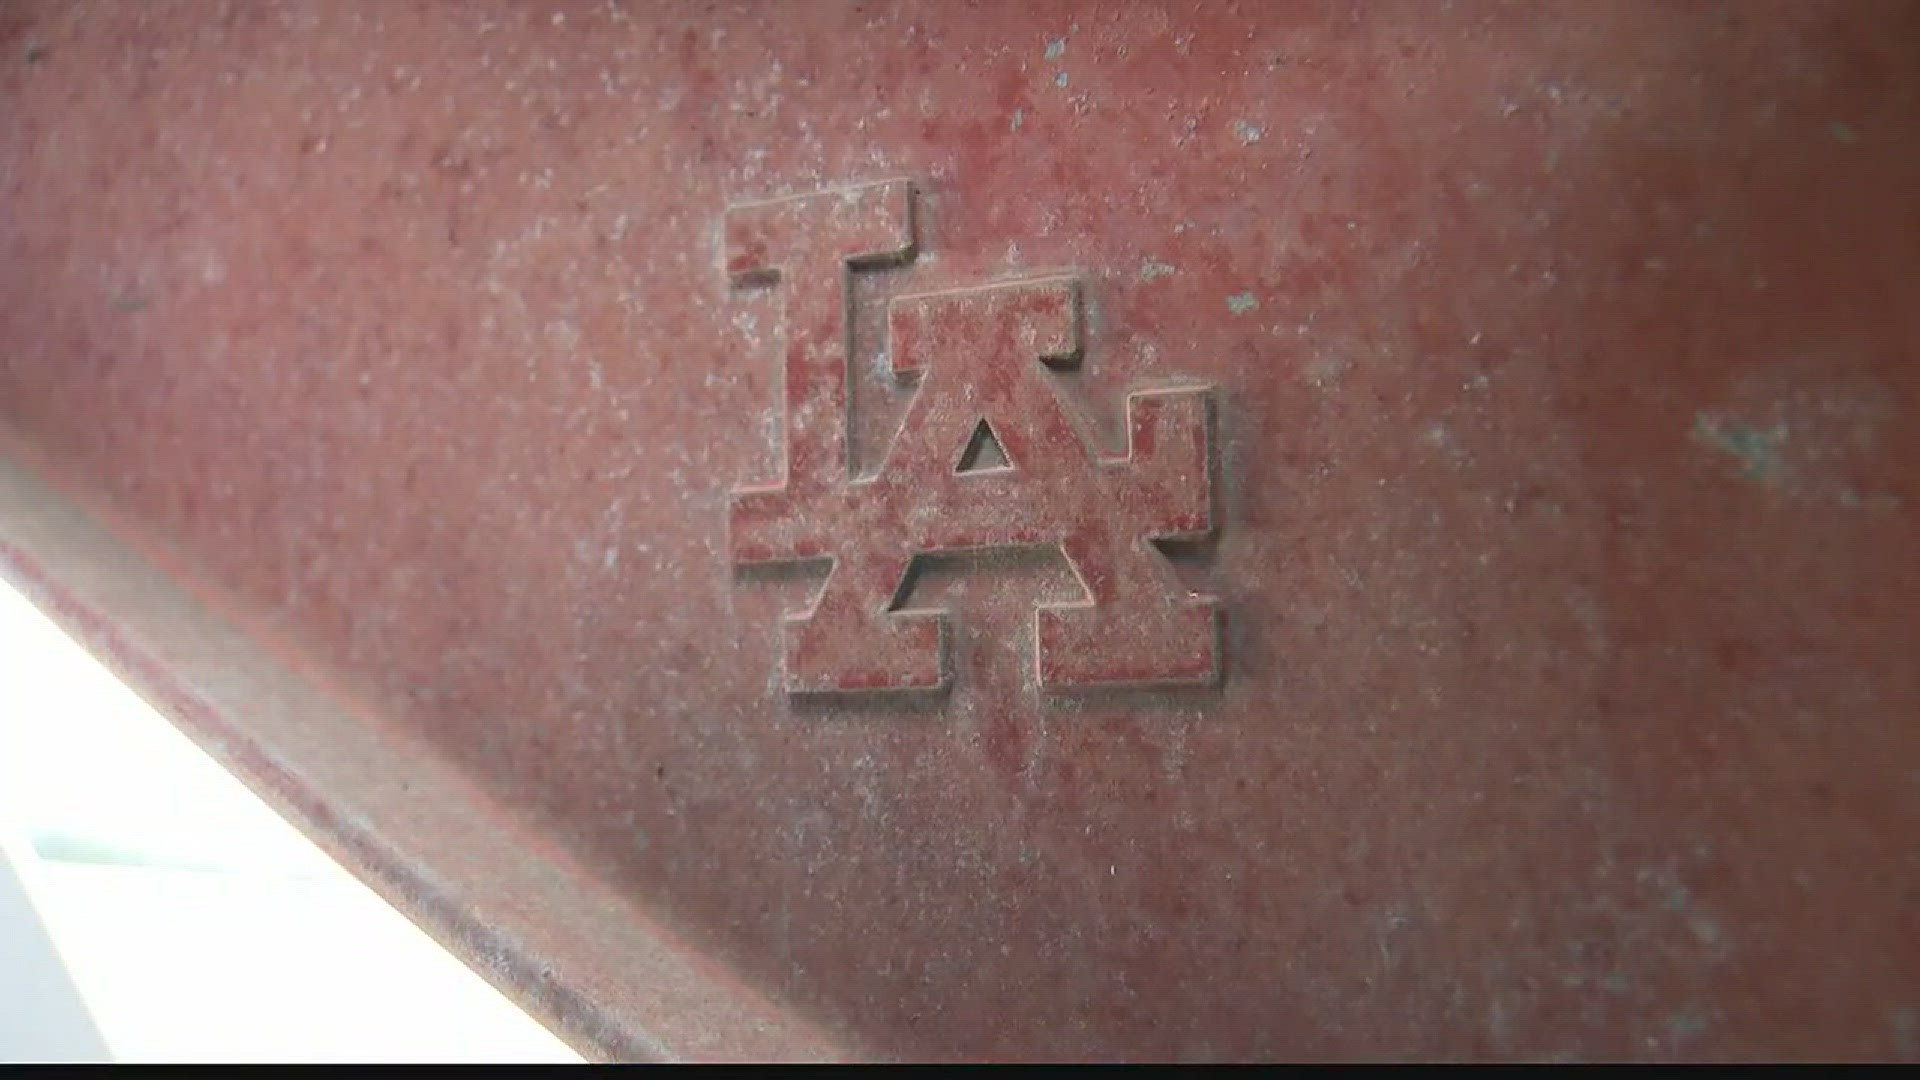 There are some LA Dodgers logos on certain seats in the WSU football stadium, and the reason they got there is a story you're going to want to hear. (8-15-17)